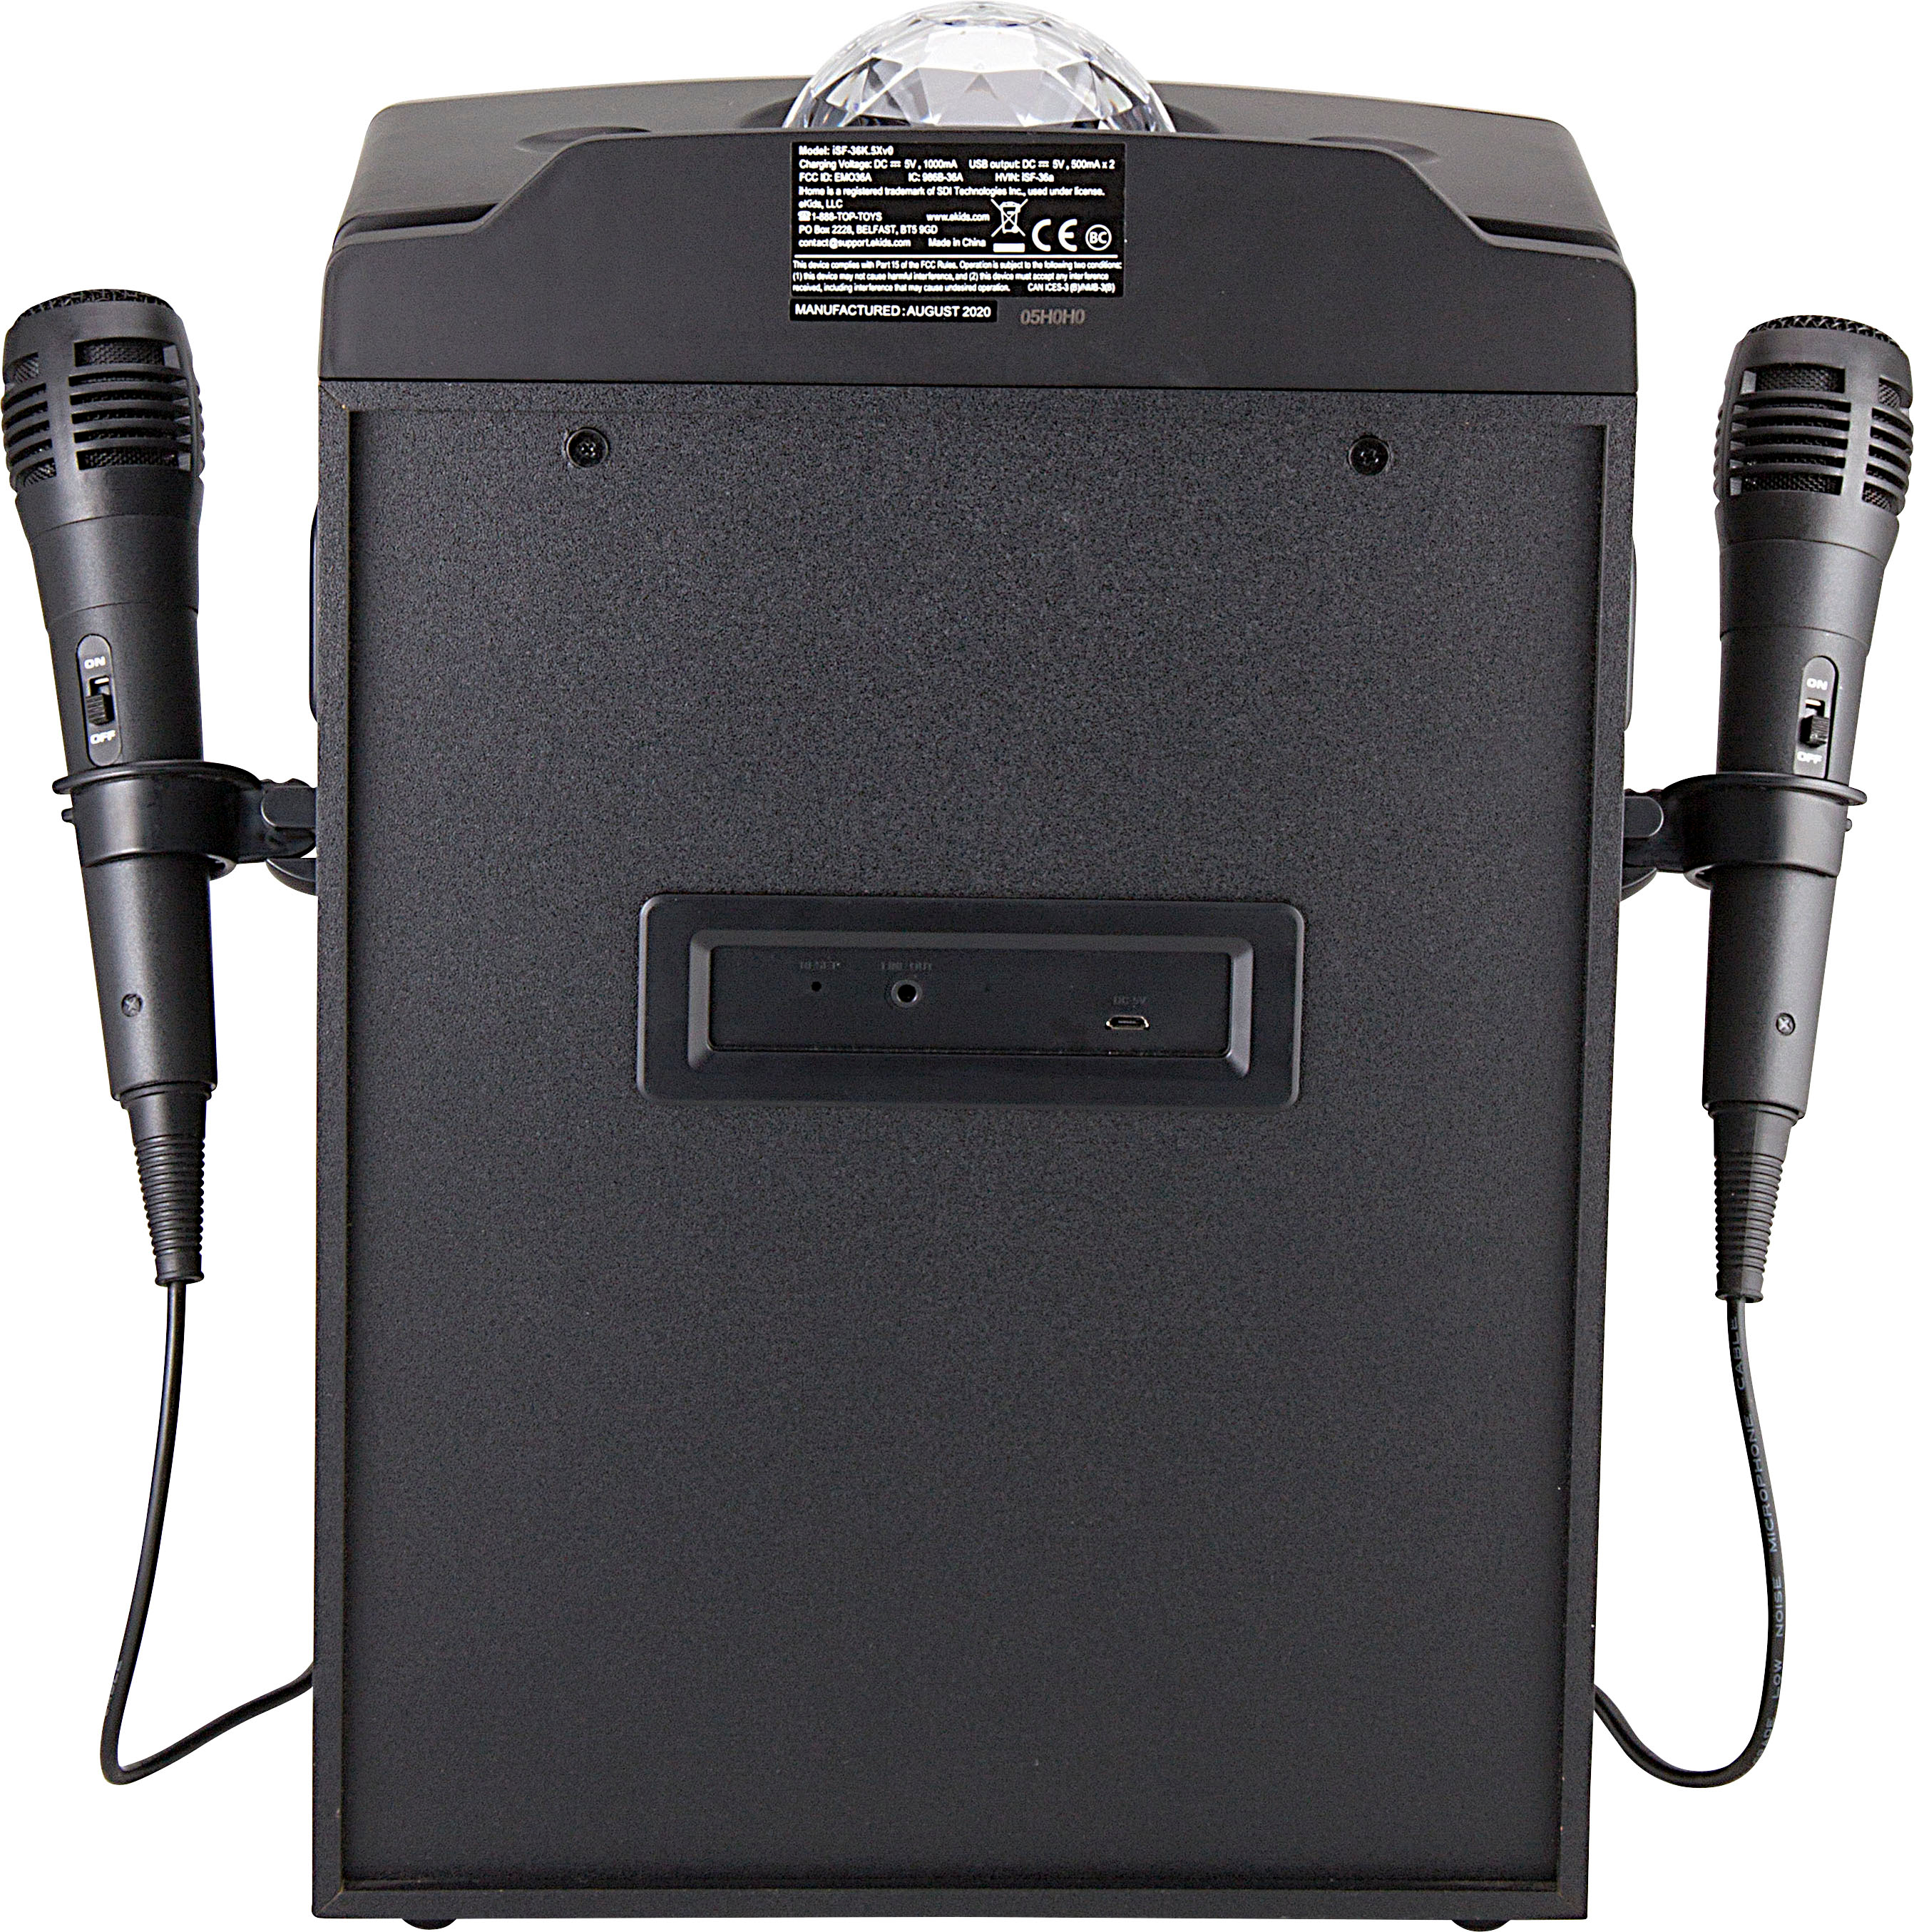 Back View: Singing Machine ISM1030BT Bluetooth Pedestal Karaoke System with Resting Tablet Cradle and 7"LCD Color Monitor and Two Microphones, Black